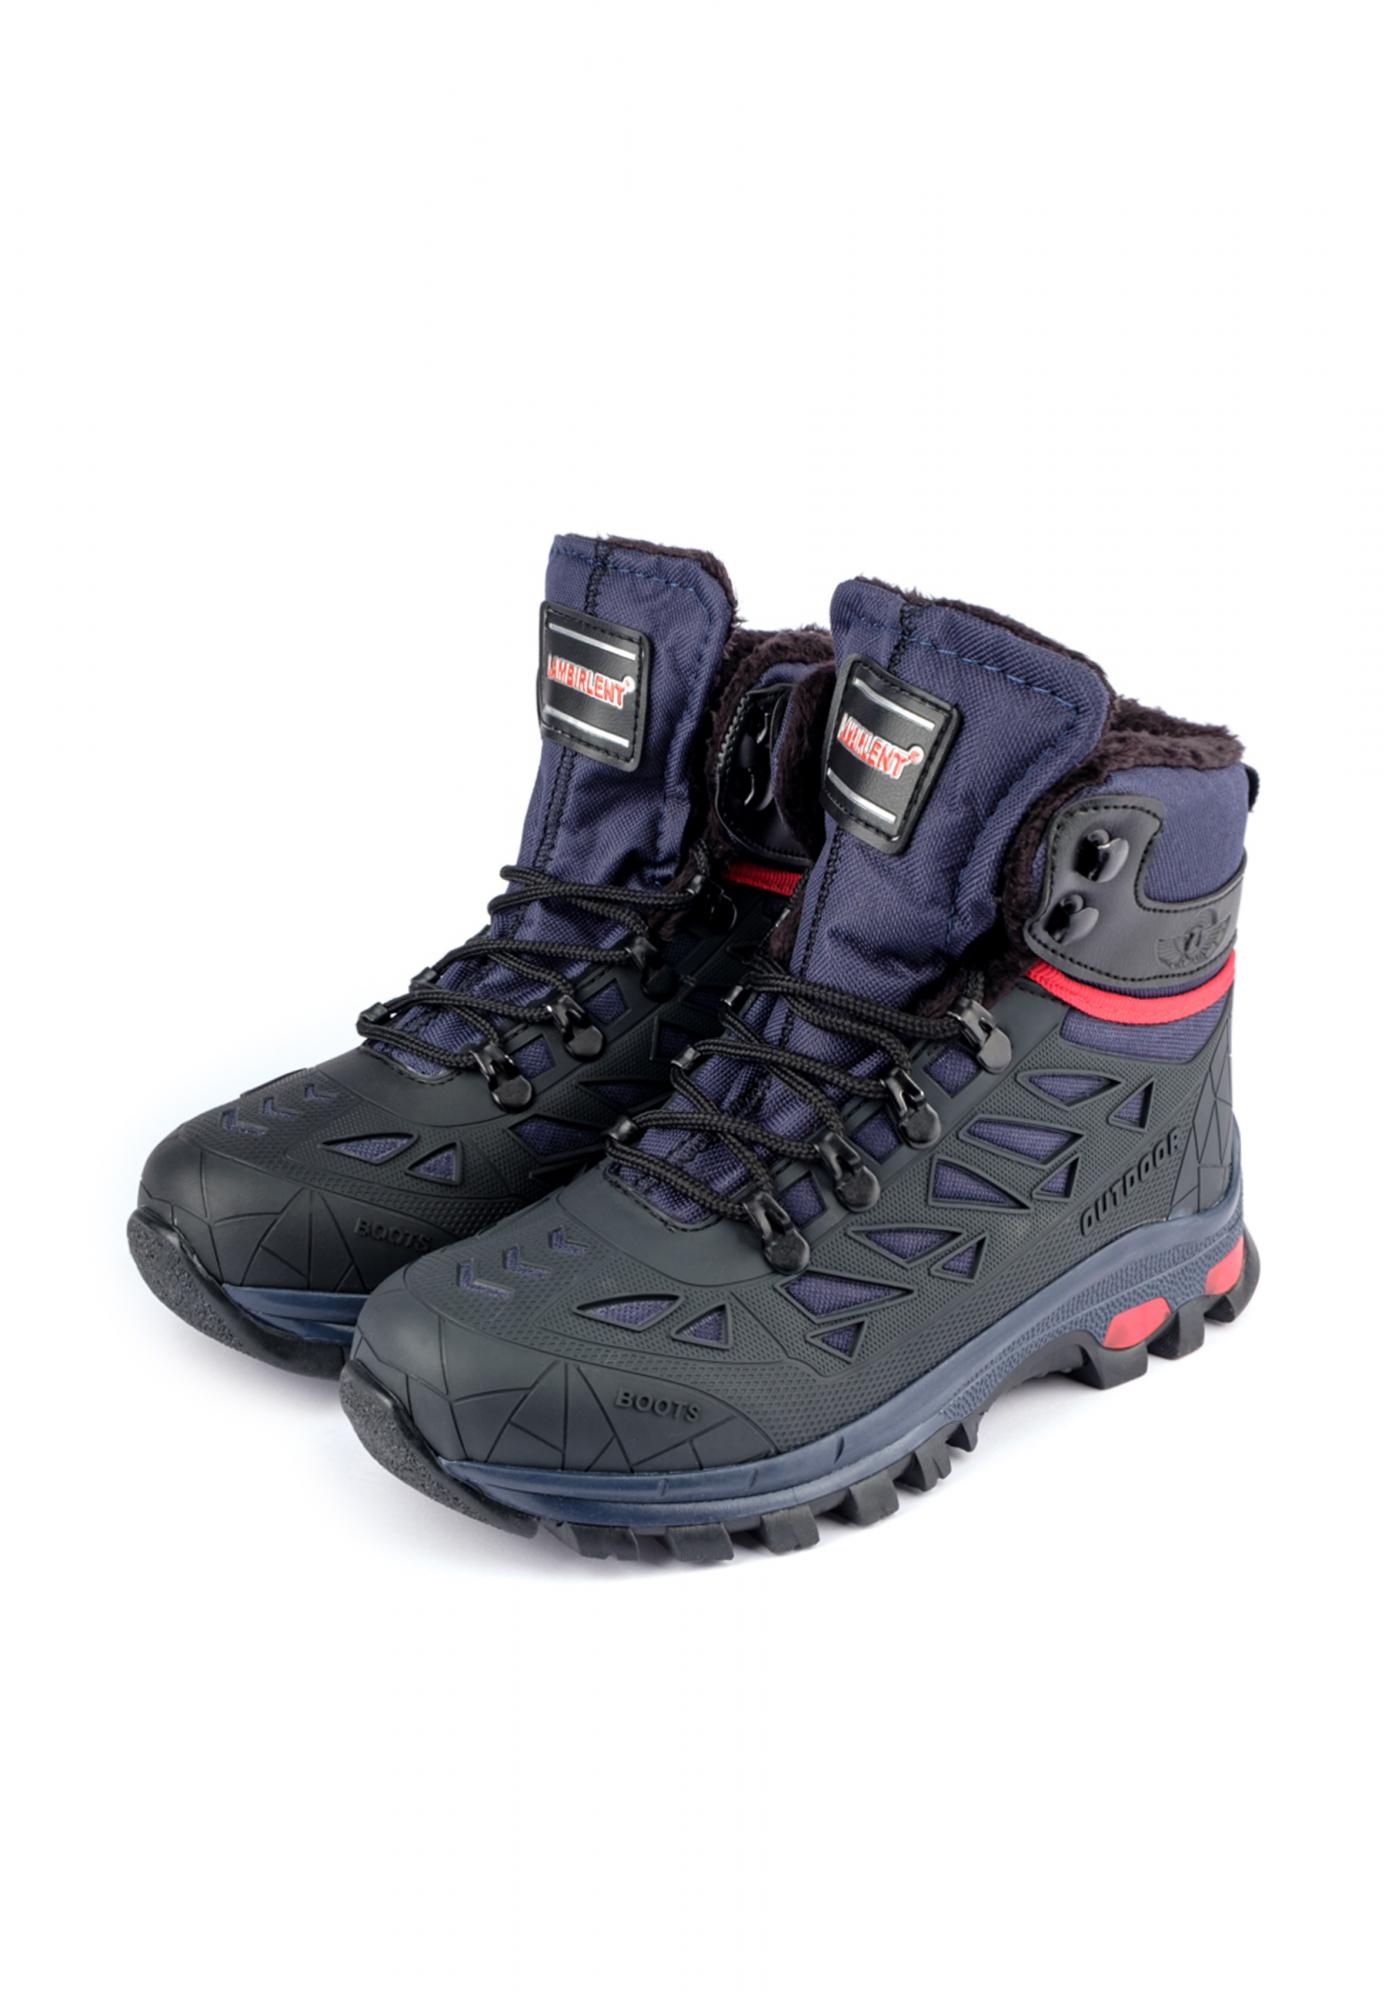 OUTDOOR AND TRACKING SHOES D548 - NAVY